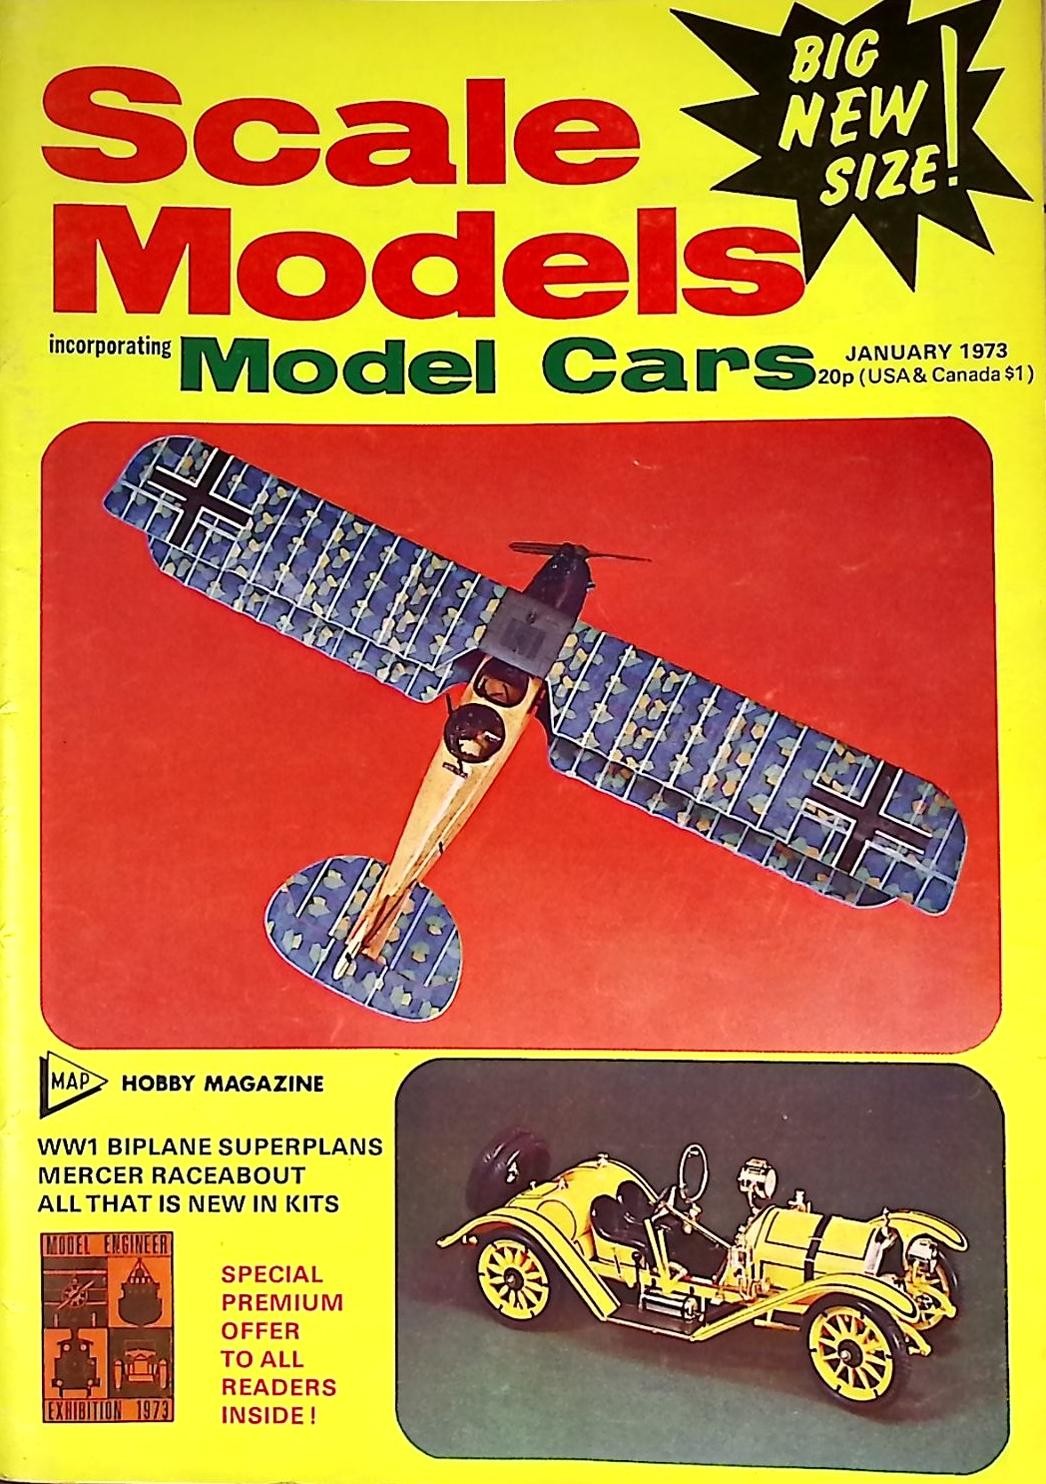 Scale Models. MAP Hobby Magazine. Volume 4. January to December 1973.